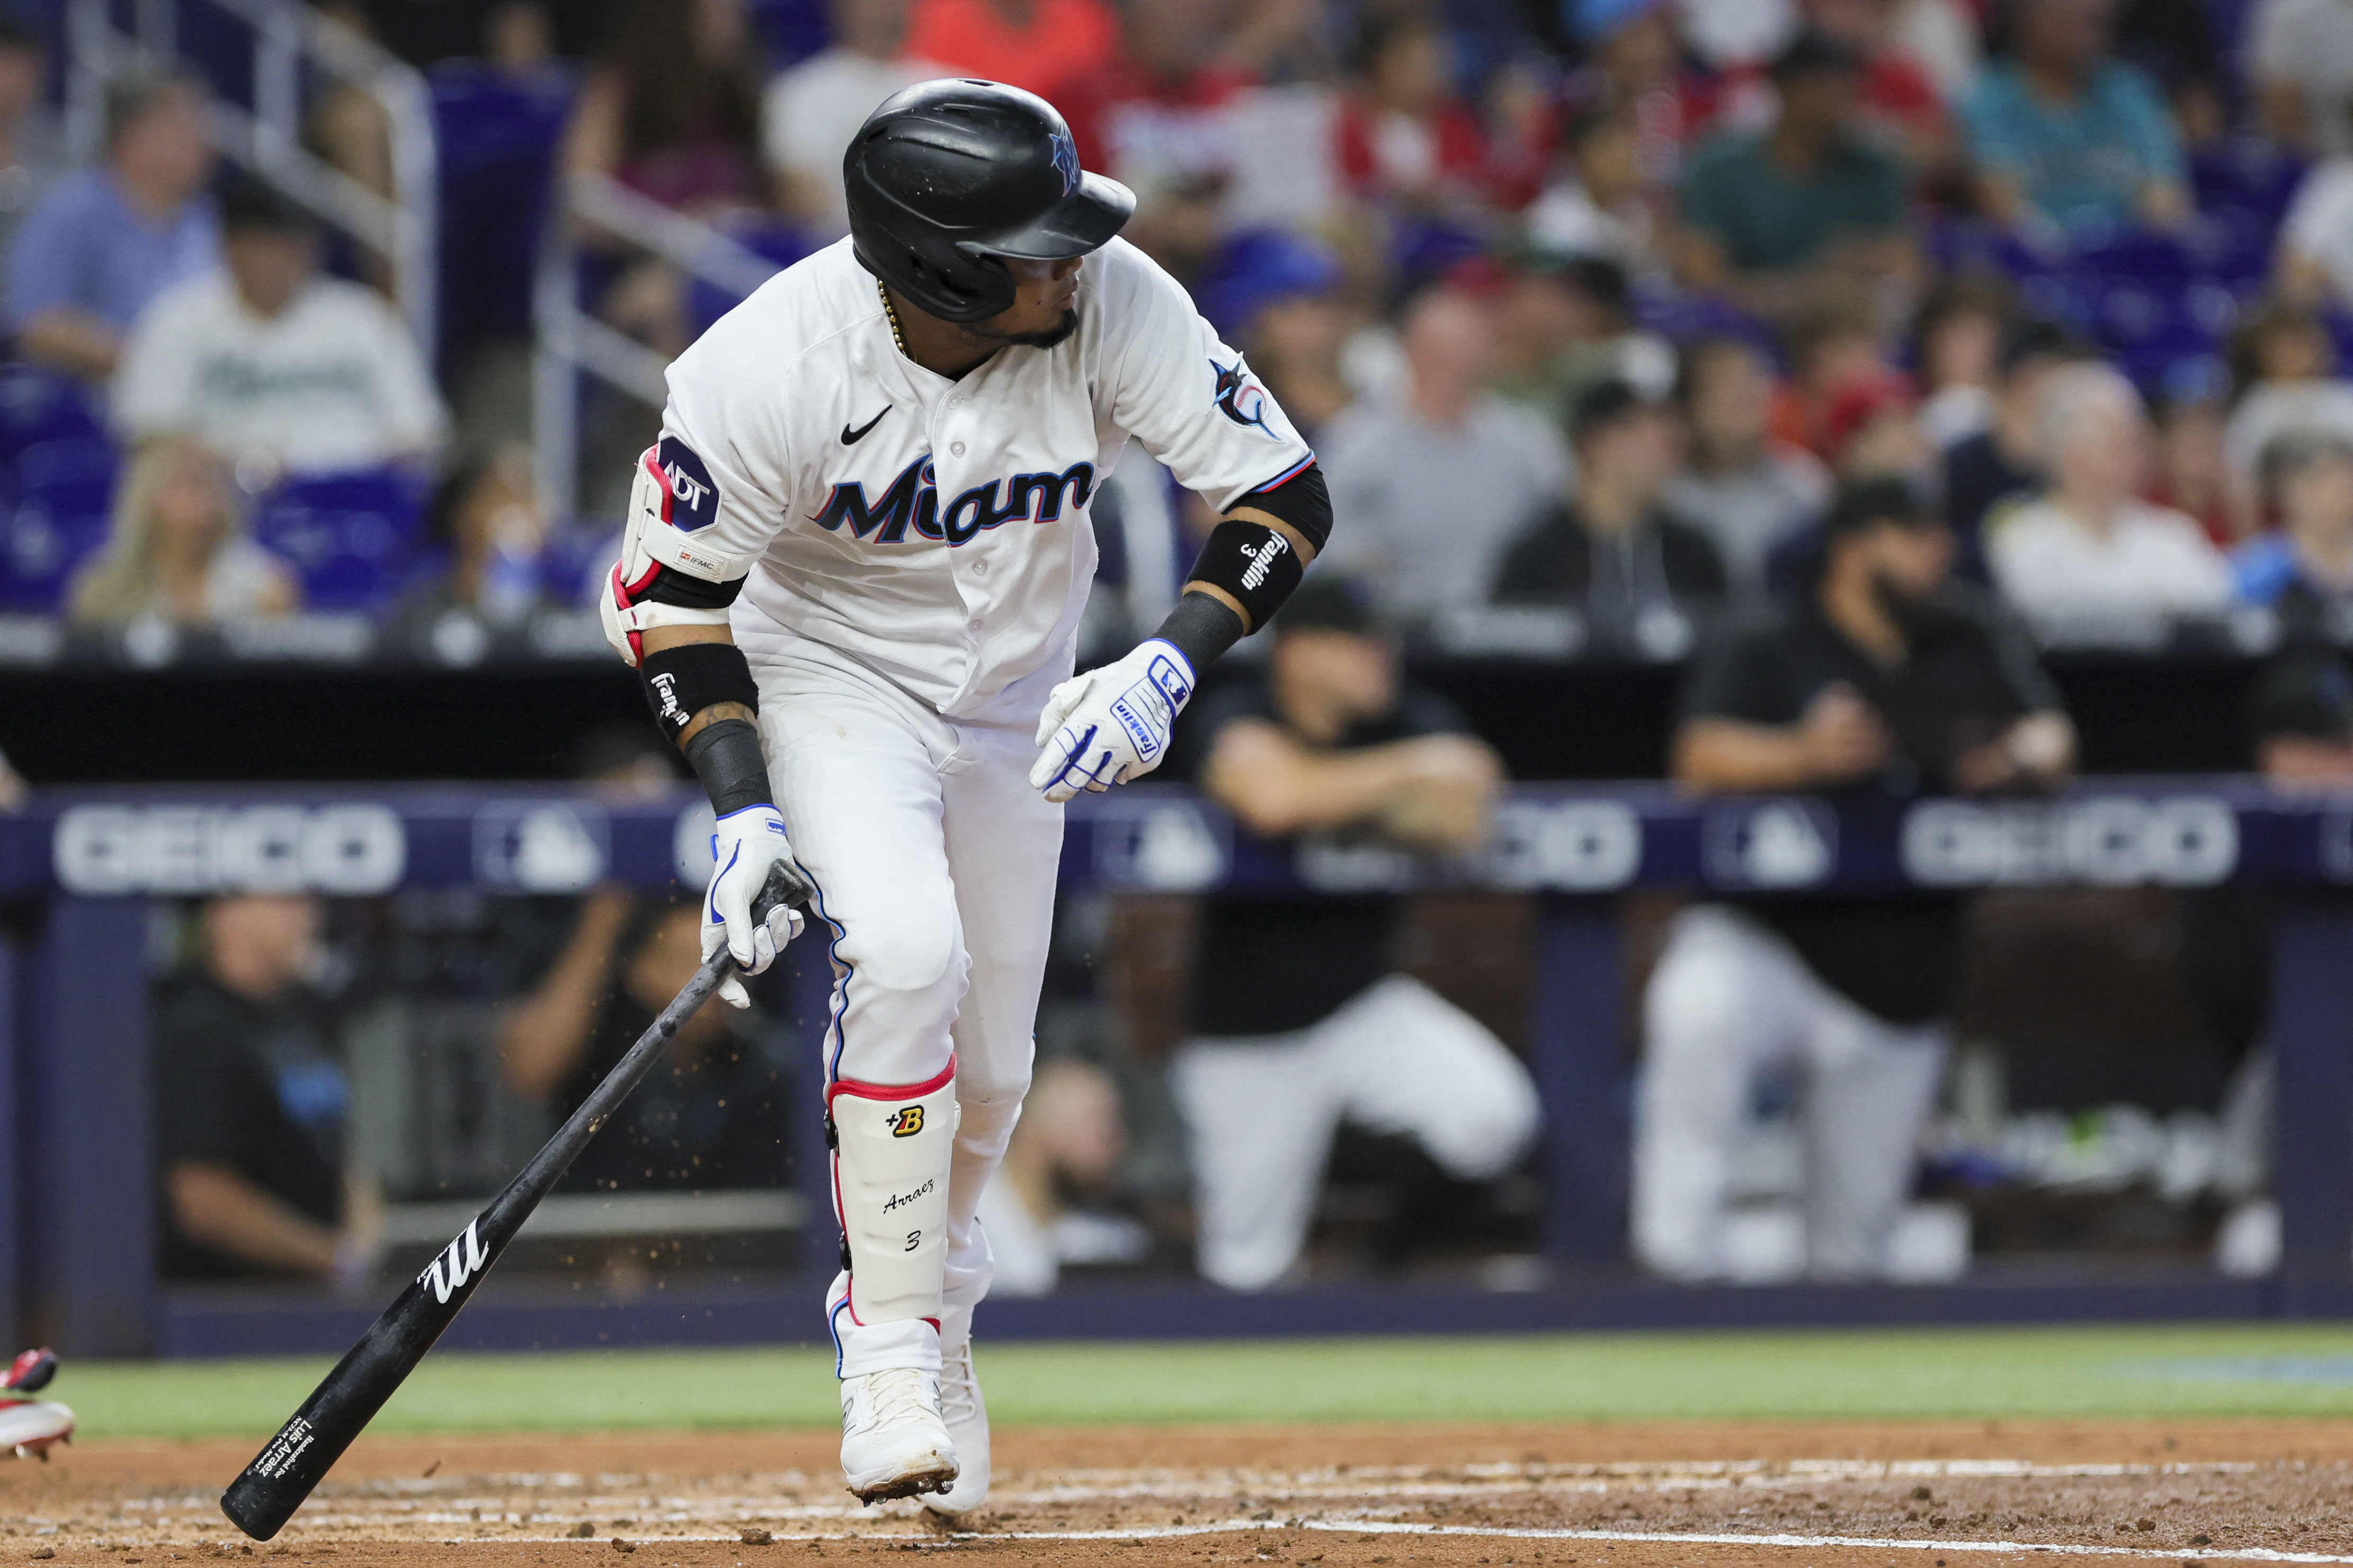 Jorge Soler's homer helps the Marlins rally for a 3-2 win over the